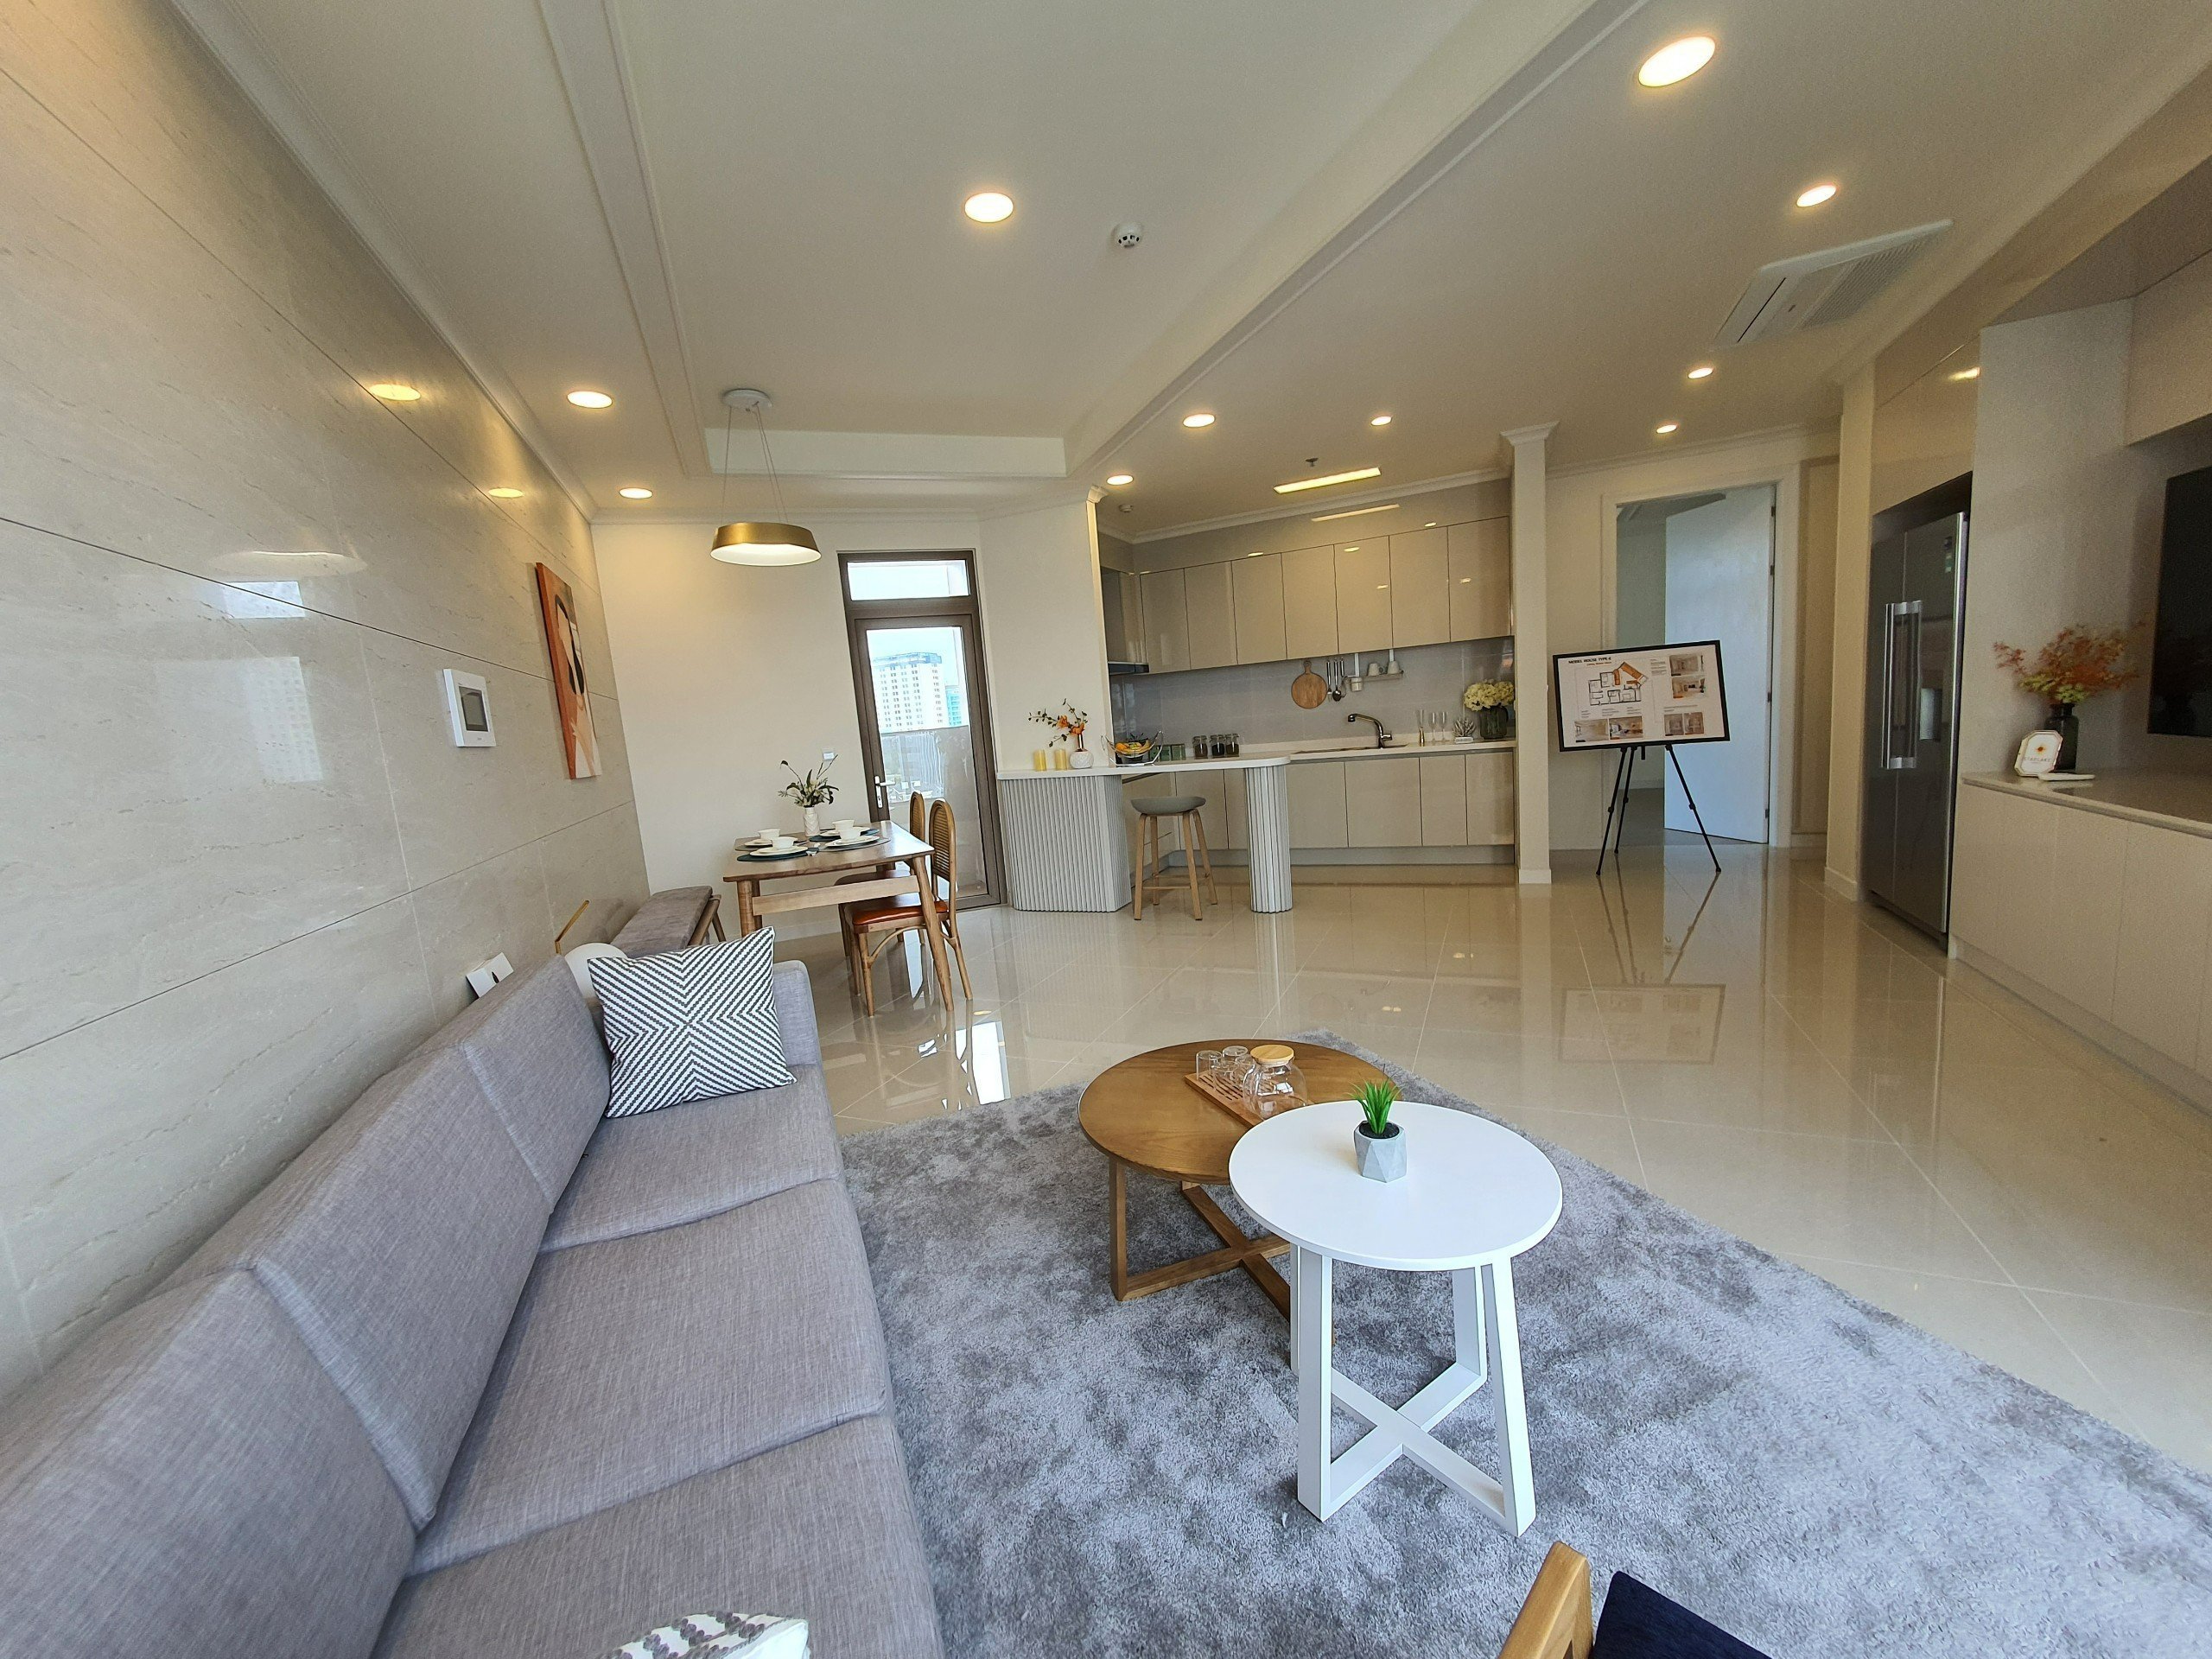 An E 3-bedroom apartment for sale in Starlake - Internal: 110sqm - Building 903B 2